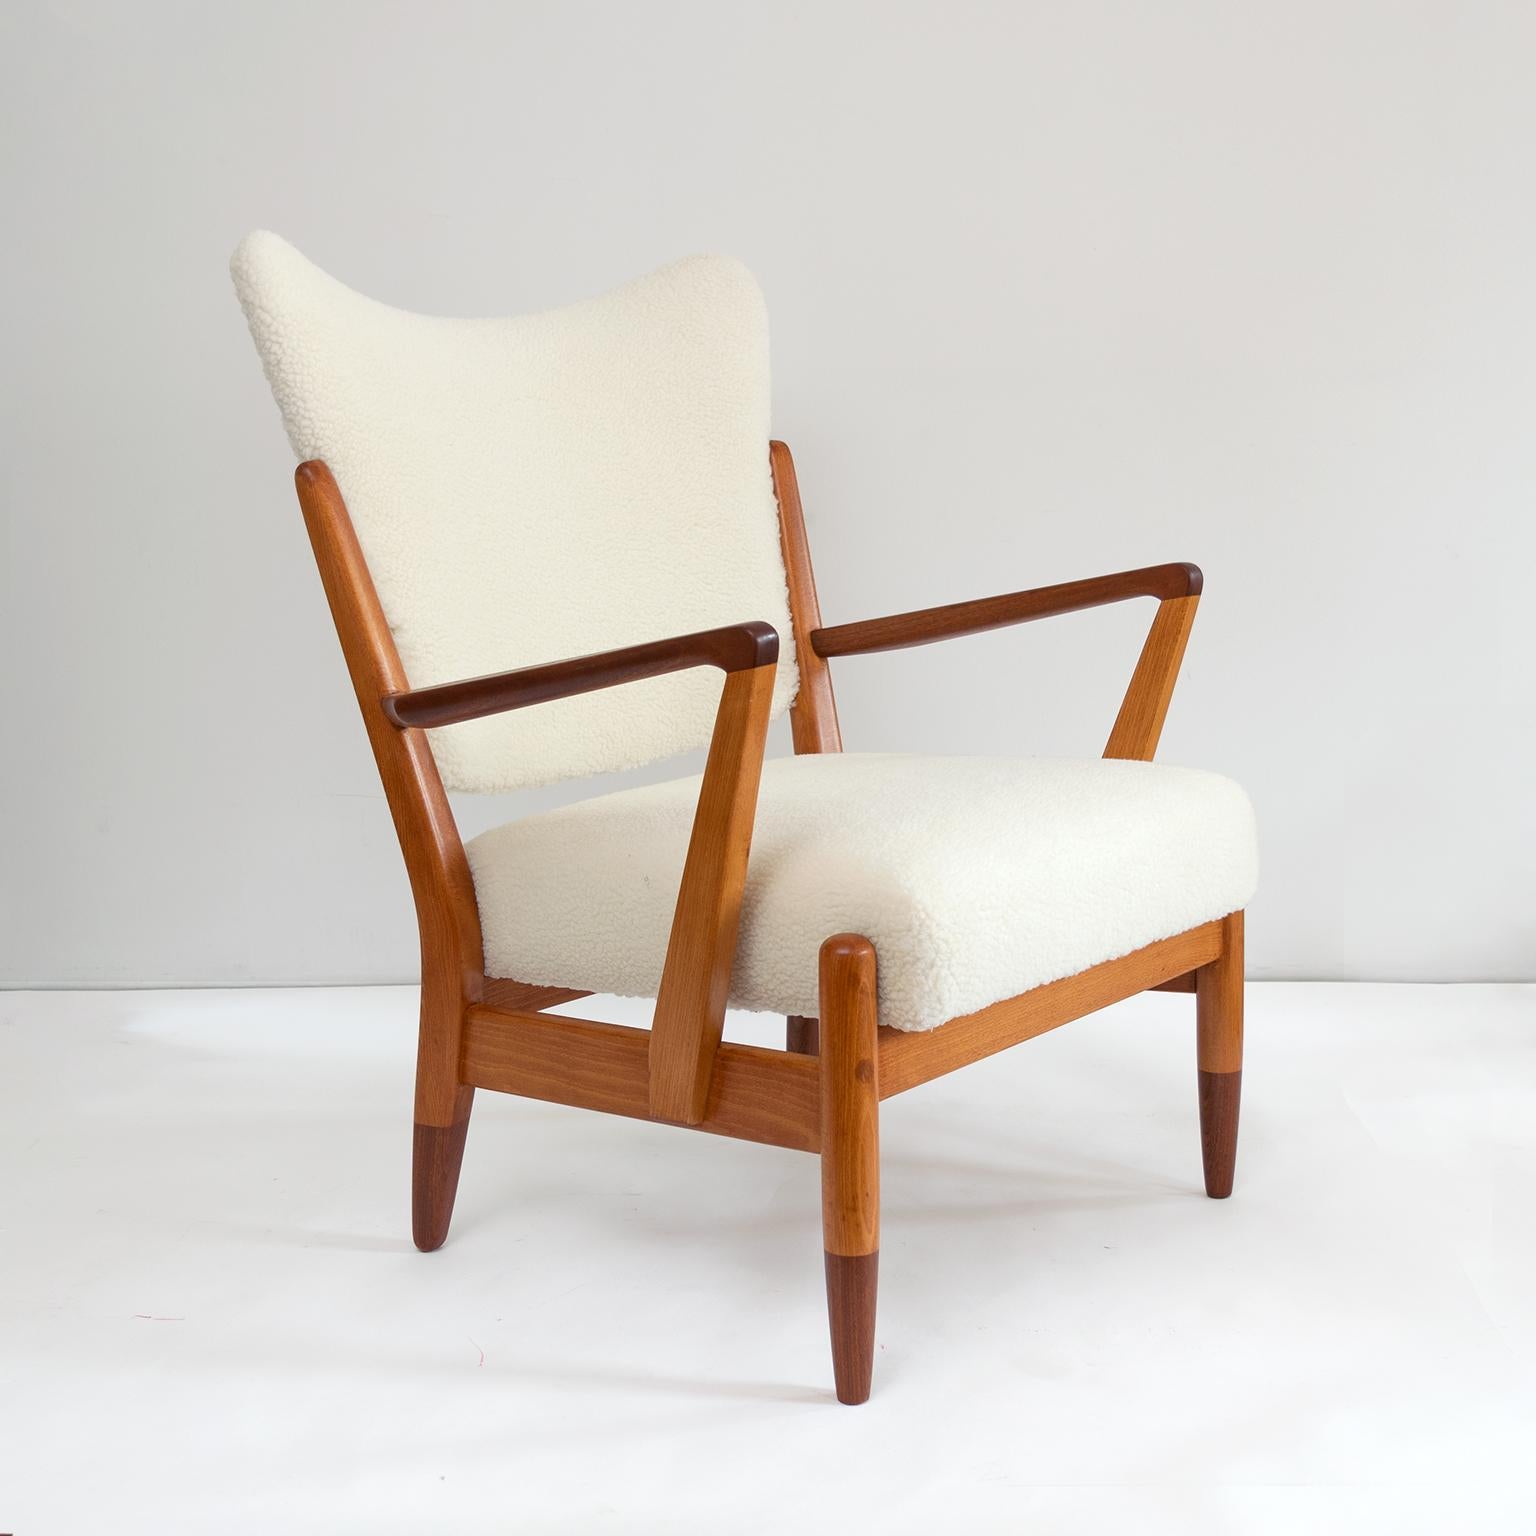 Carved Pair of Scandinavian Modern Lounge Chairs with Faux Sheepskin, Teak Details